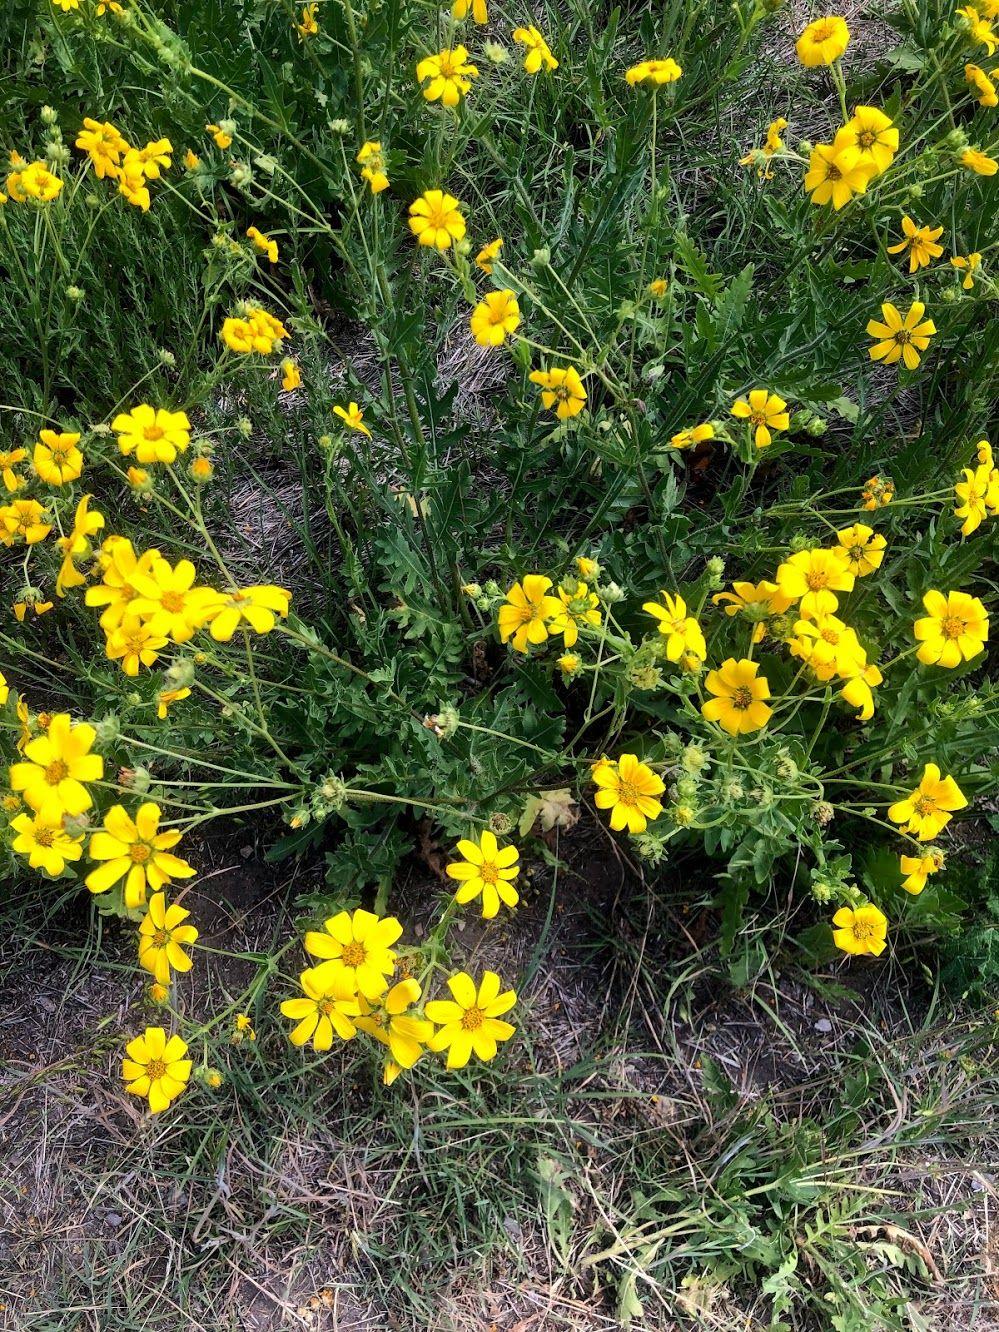 A close up of yellow flowers in Dinosaur Valley State Park.